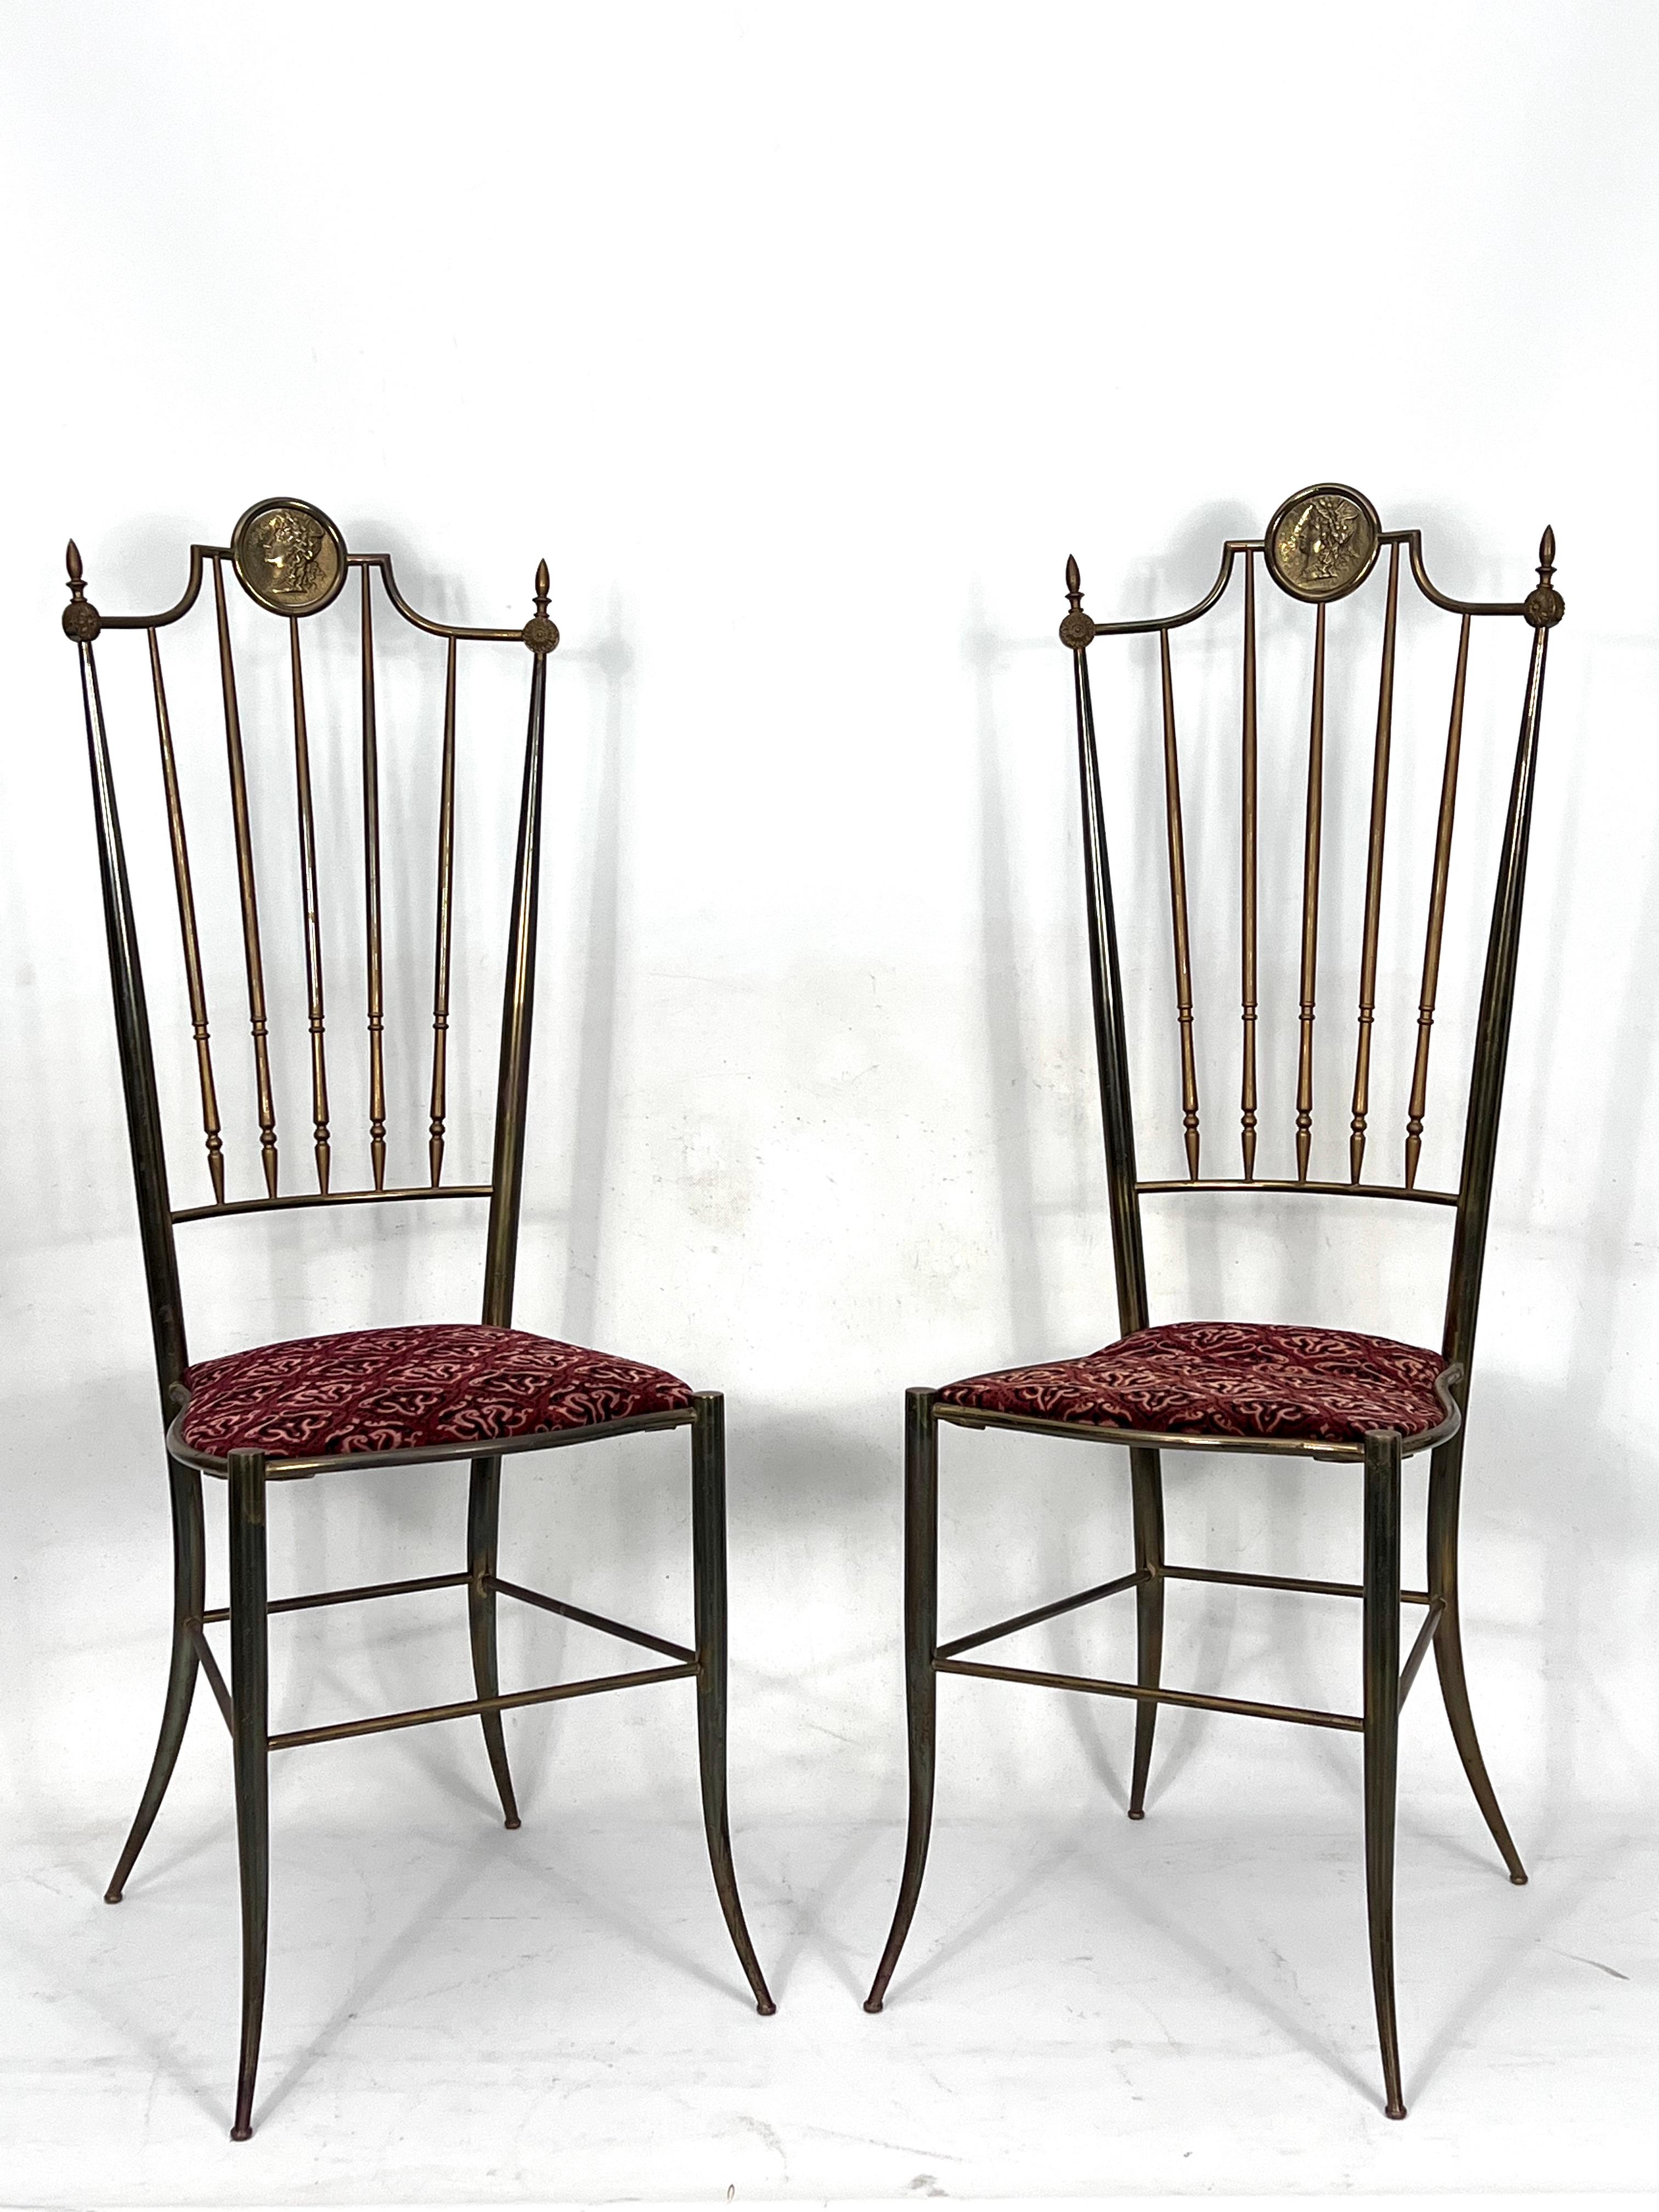 This set of two elegant Chiavari chairs was produced in Italy during the 1950s. They are made of brass. Vintage condition with original patina and normal trace of age and use.